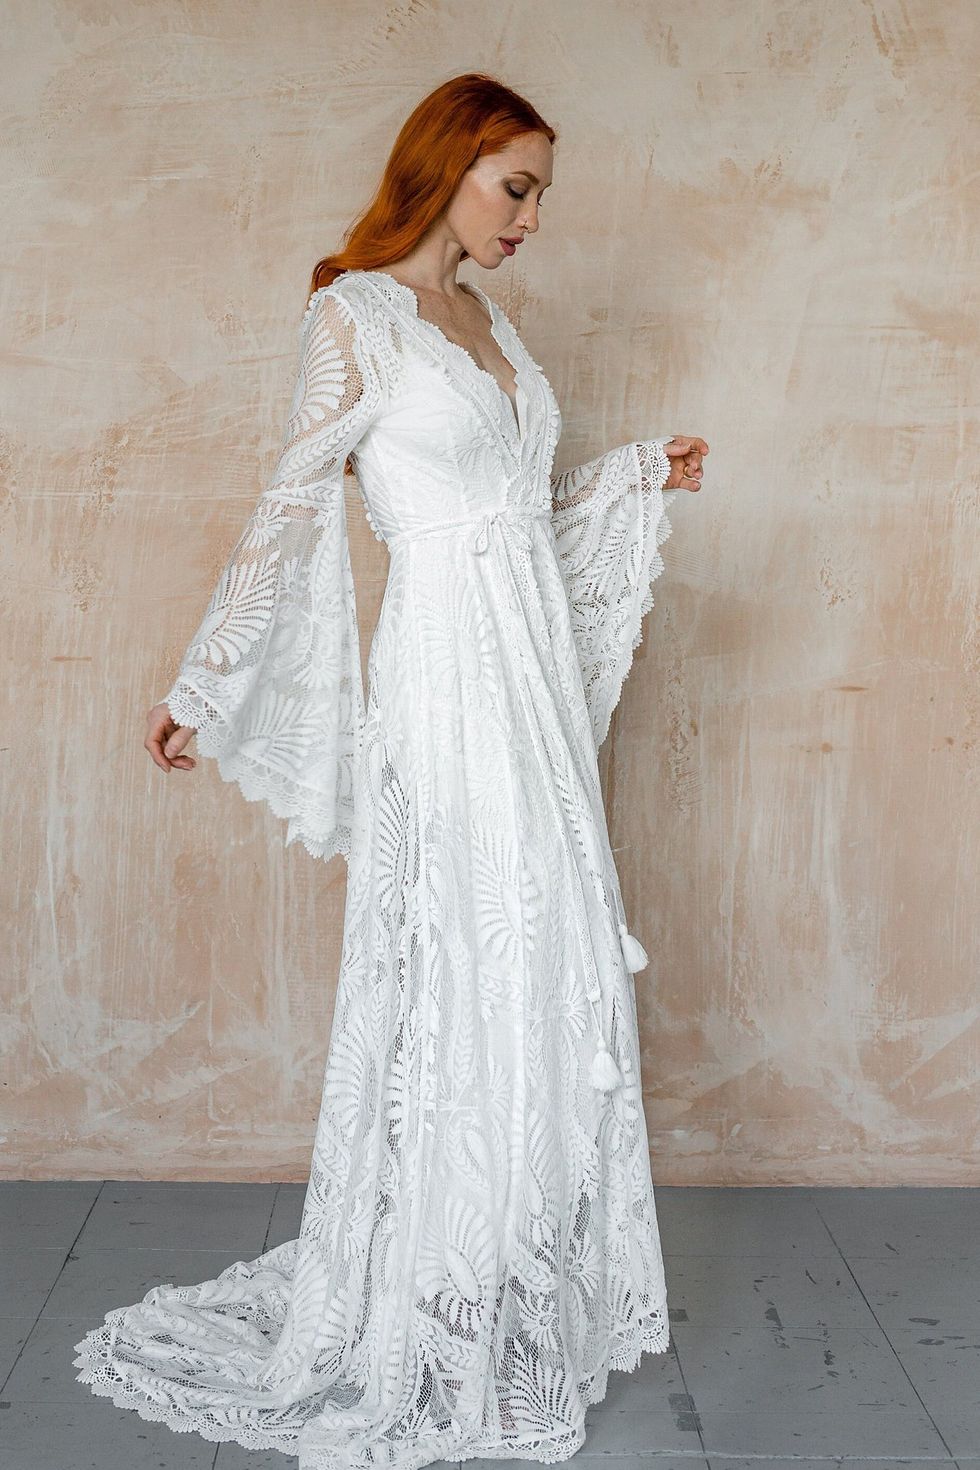 Lace boho wedding dress with long wide sleeves